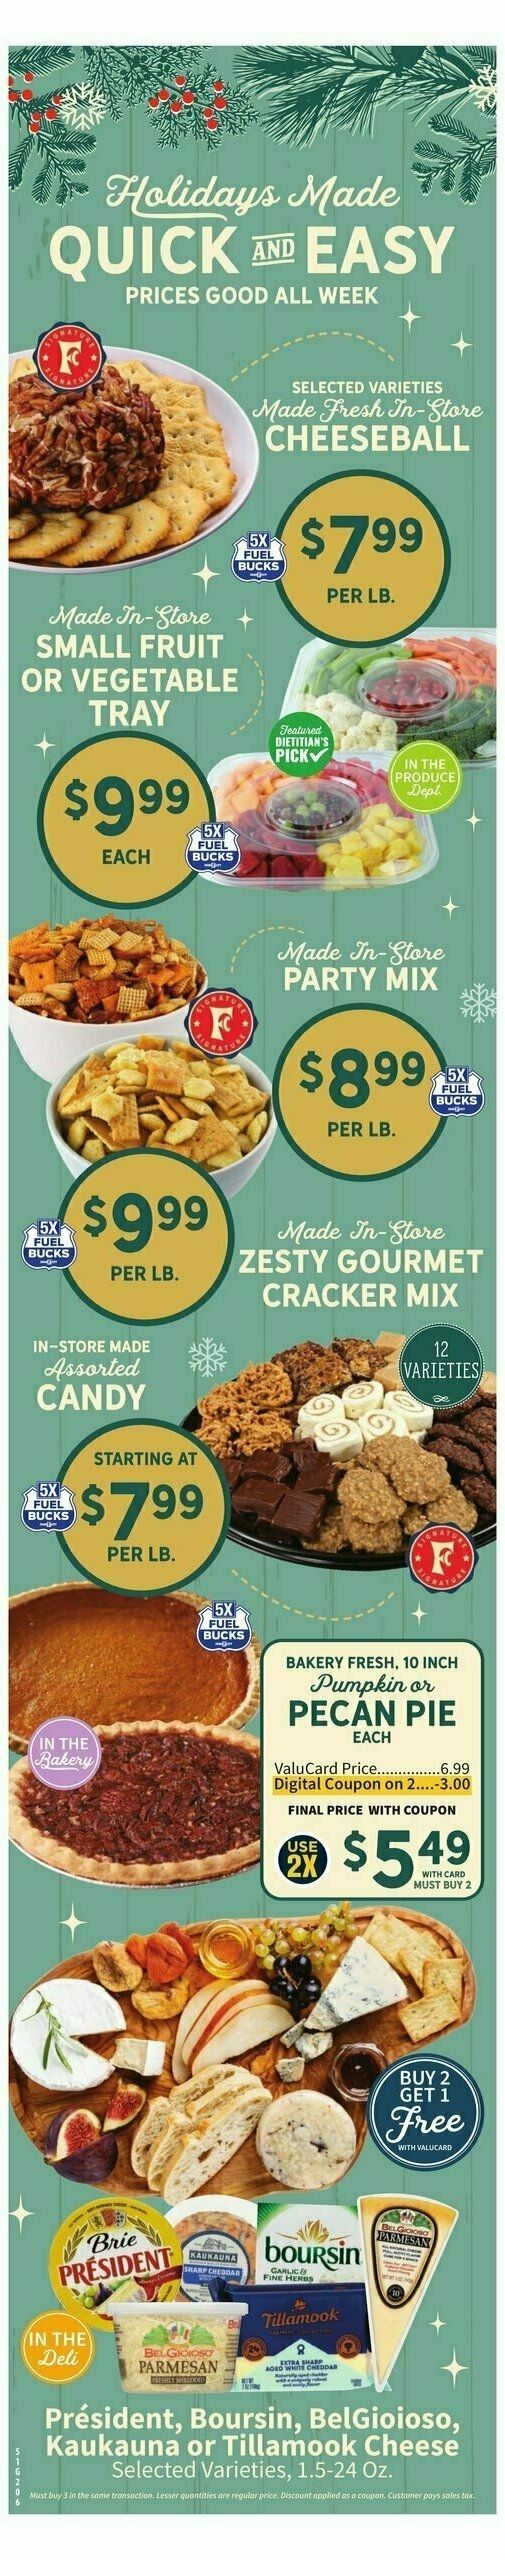 Food City Weekly Ad from December 20